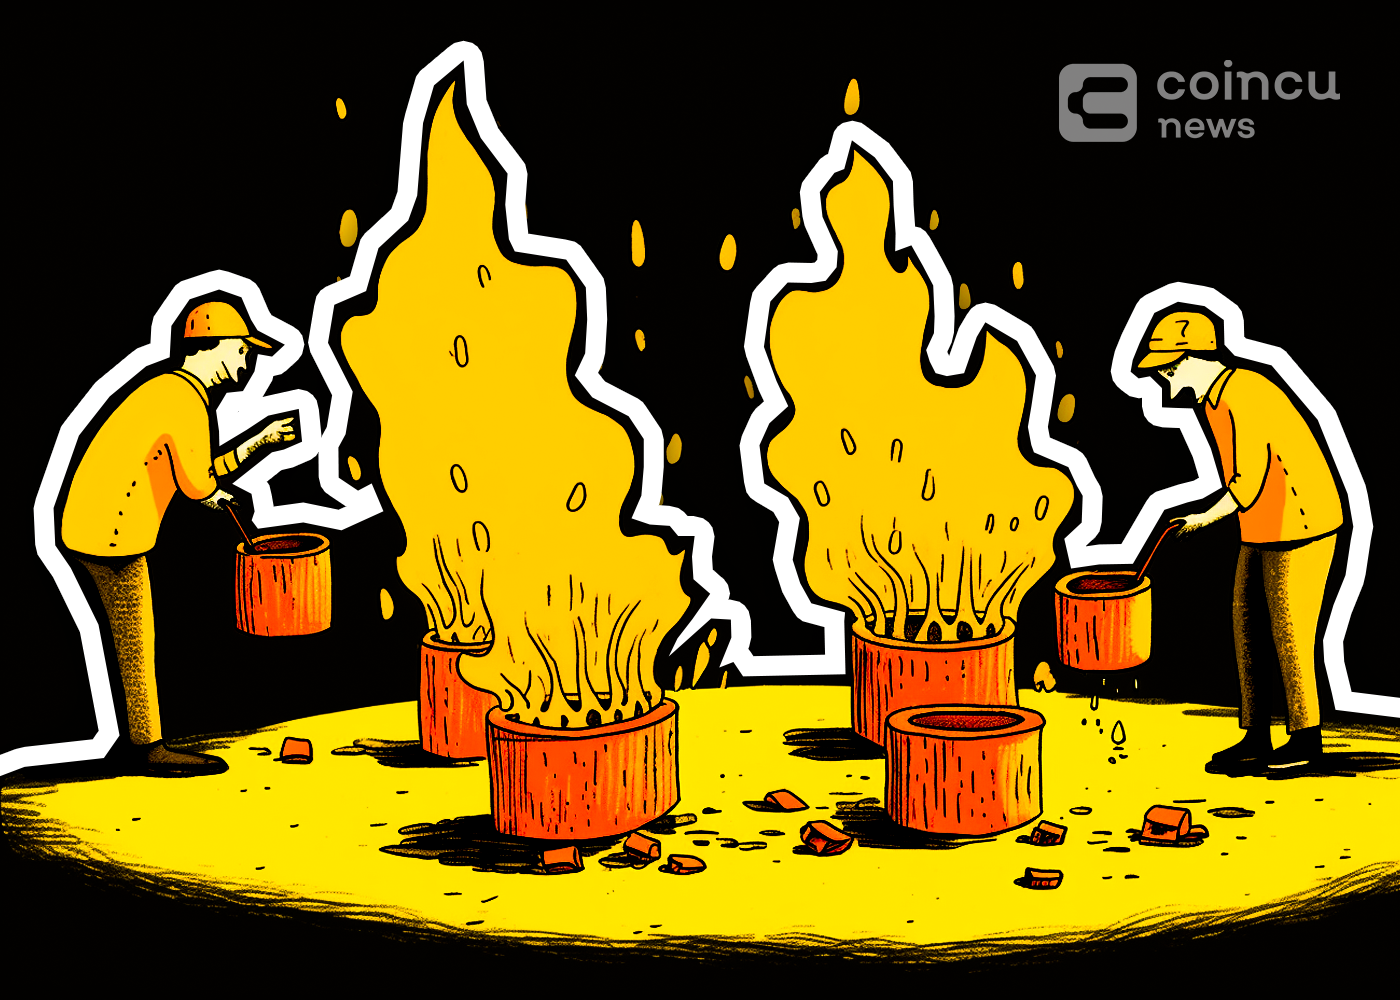 Binance-Completes-Burning-Nearly-2-Million-BNB-Amid-The-Downfall